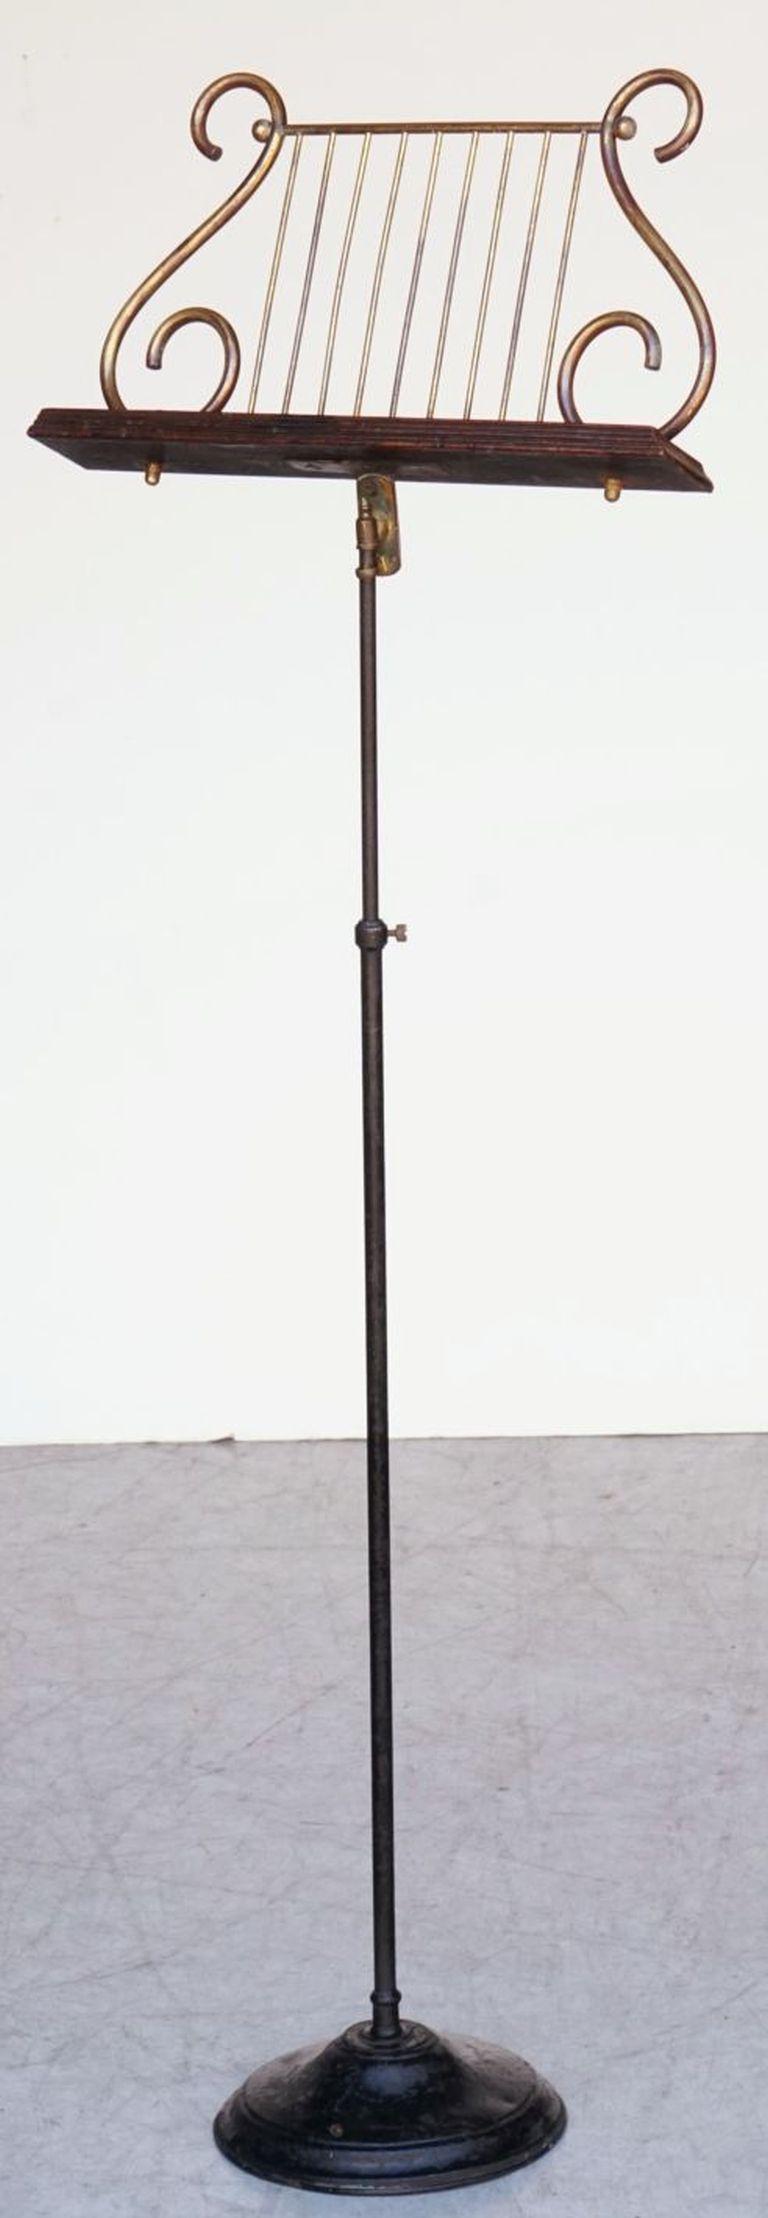 English Adjustable Lyre-Shaped Music Stand from the Edwardian Era For Sale 7